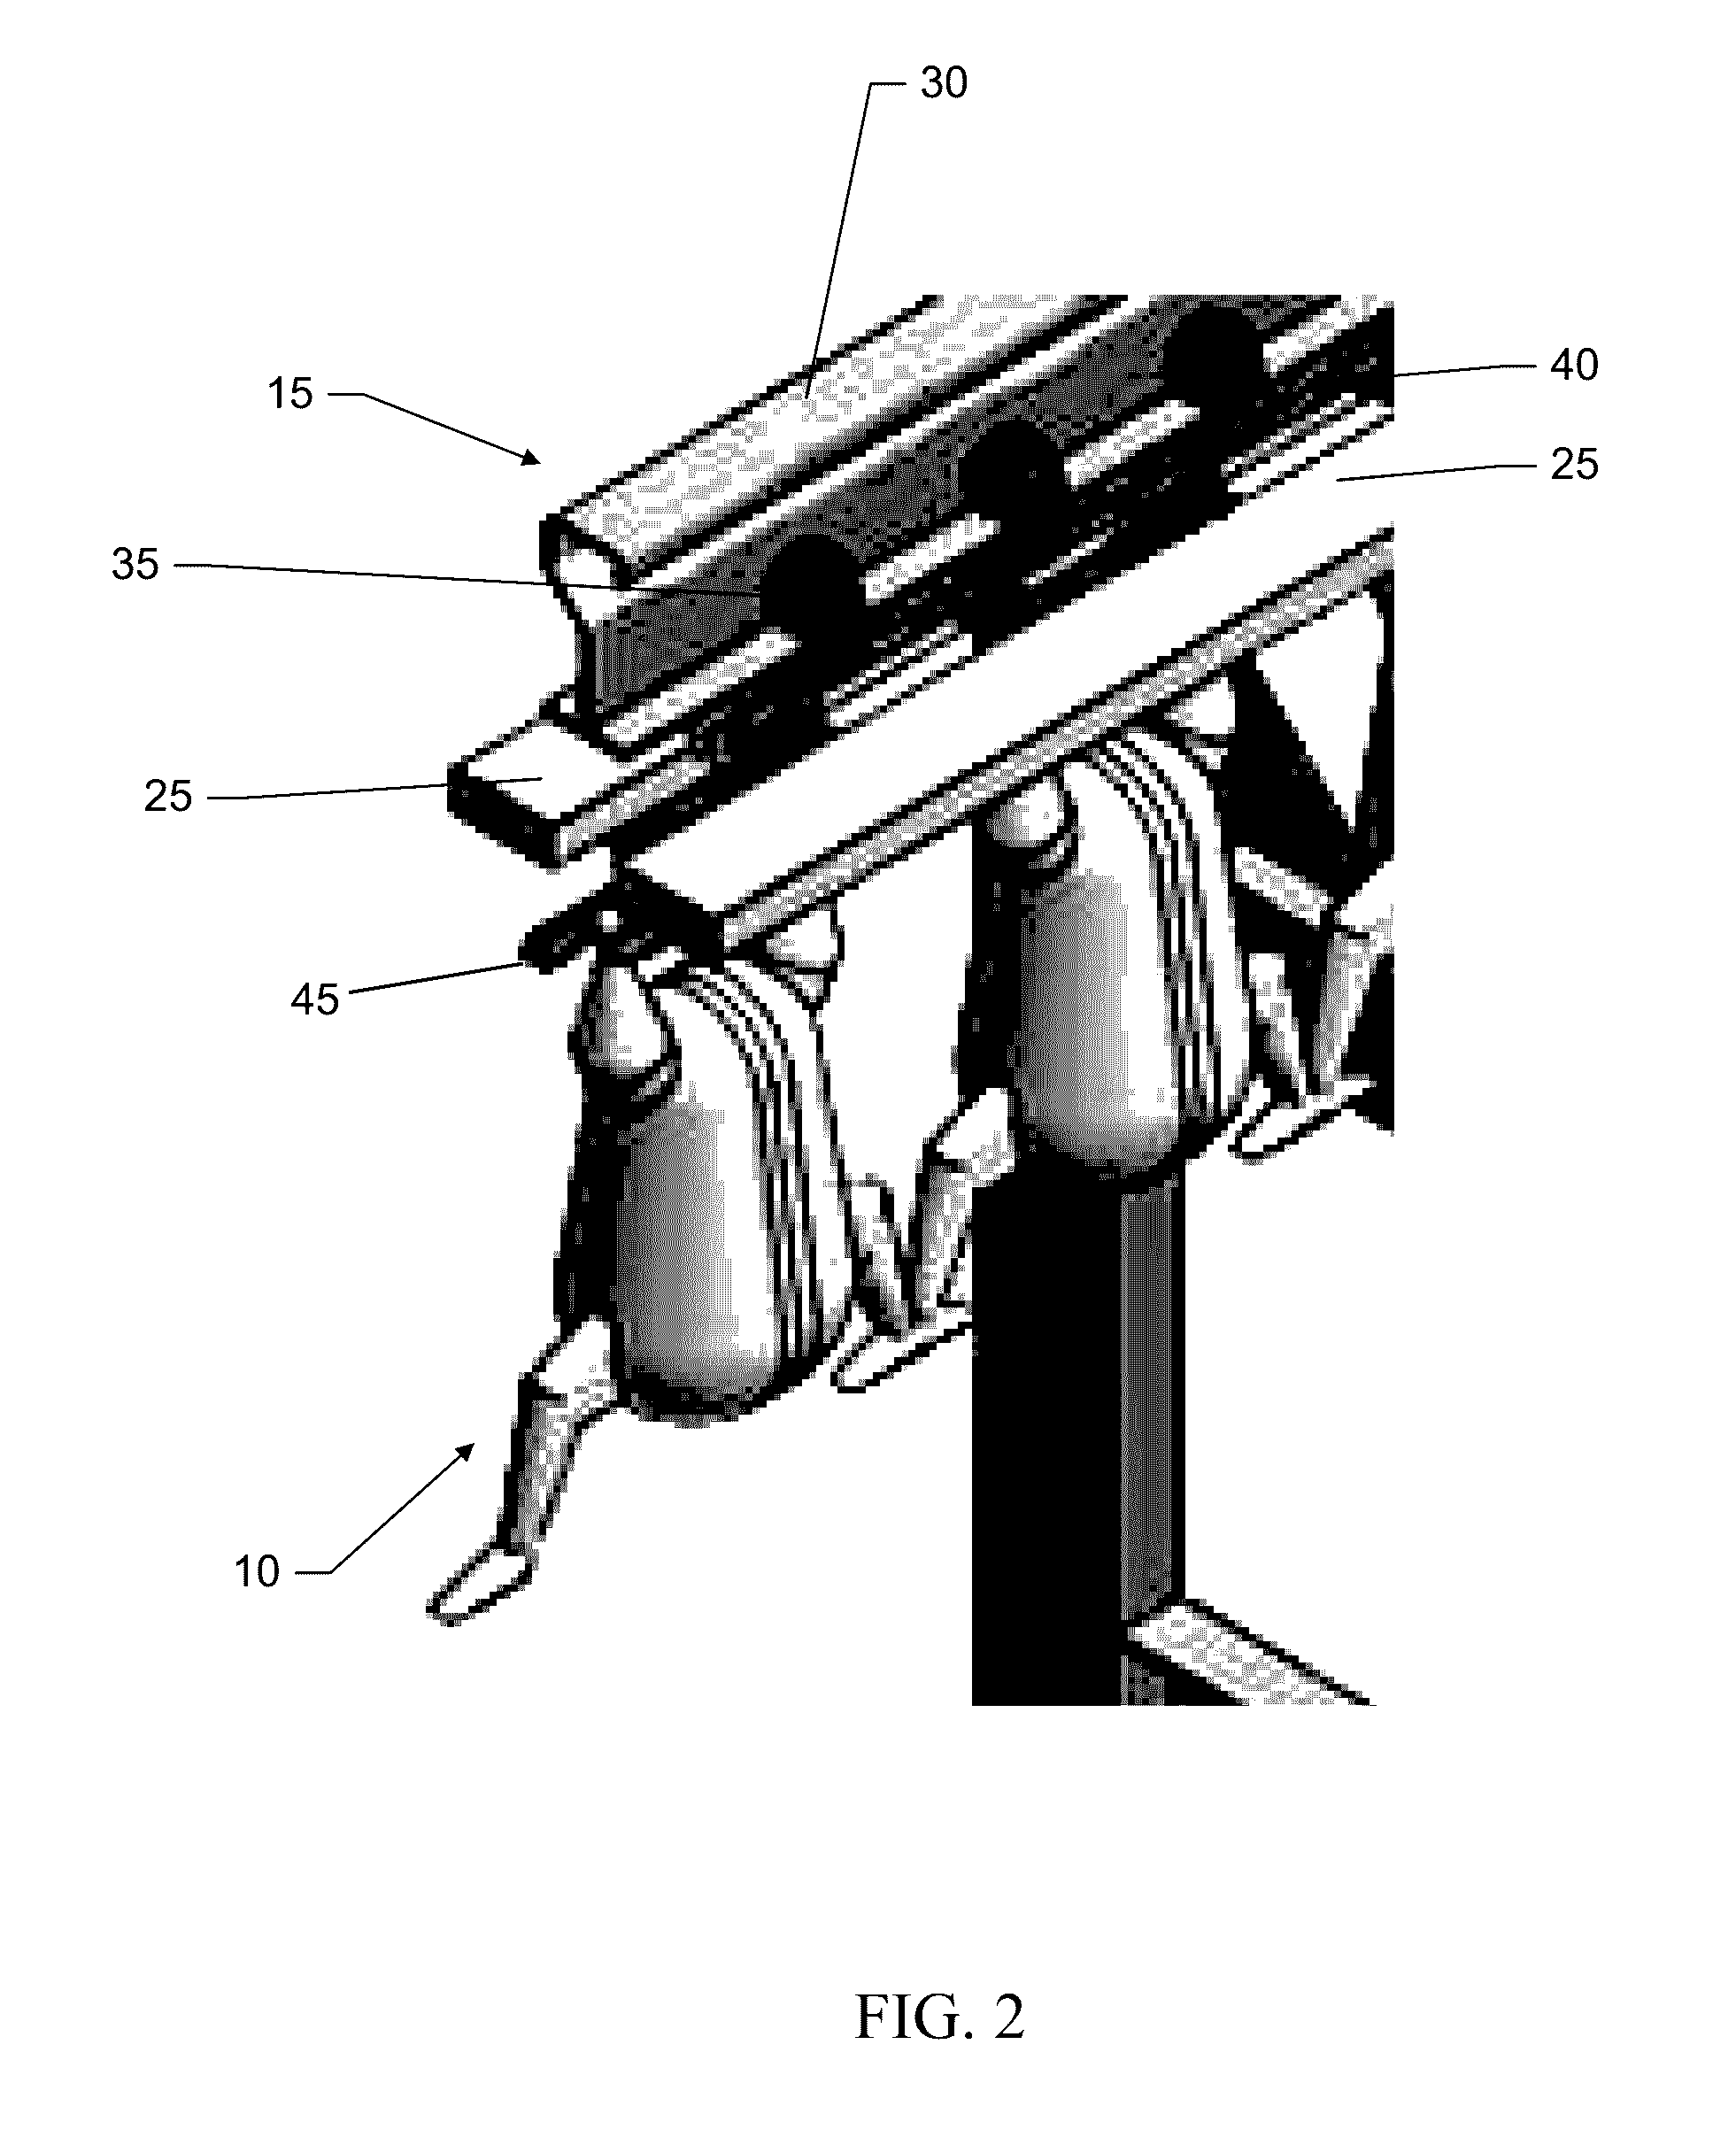 Apparatus and method for spraying food and food processing articles with antimicrobials and other agents